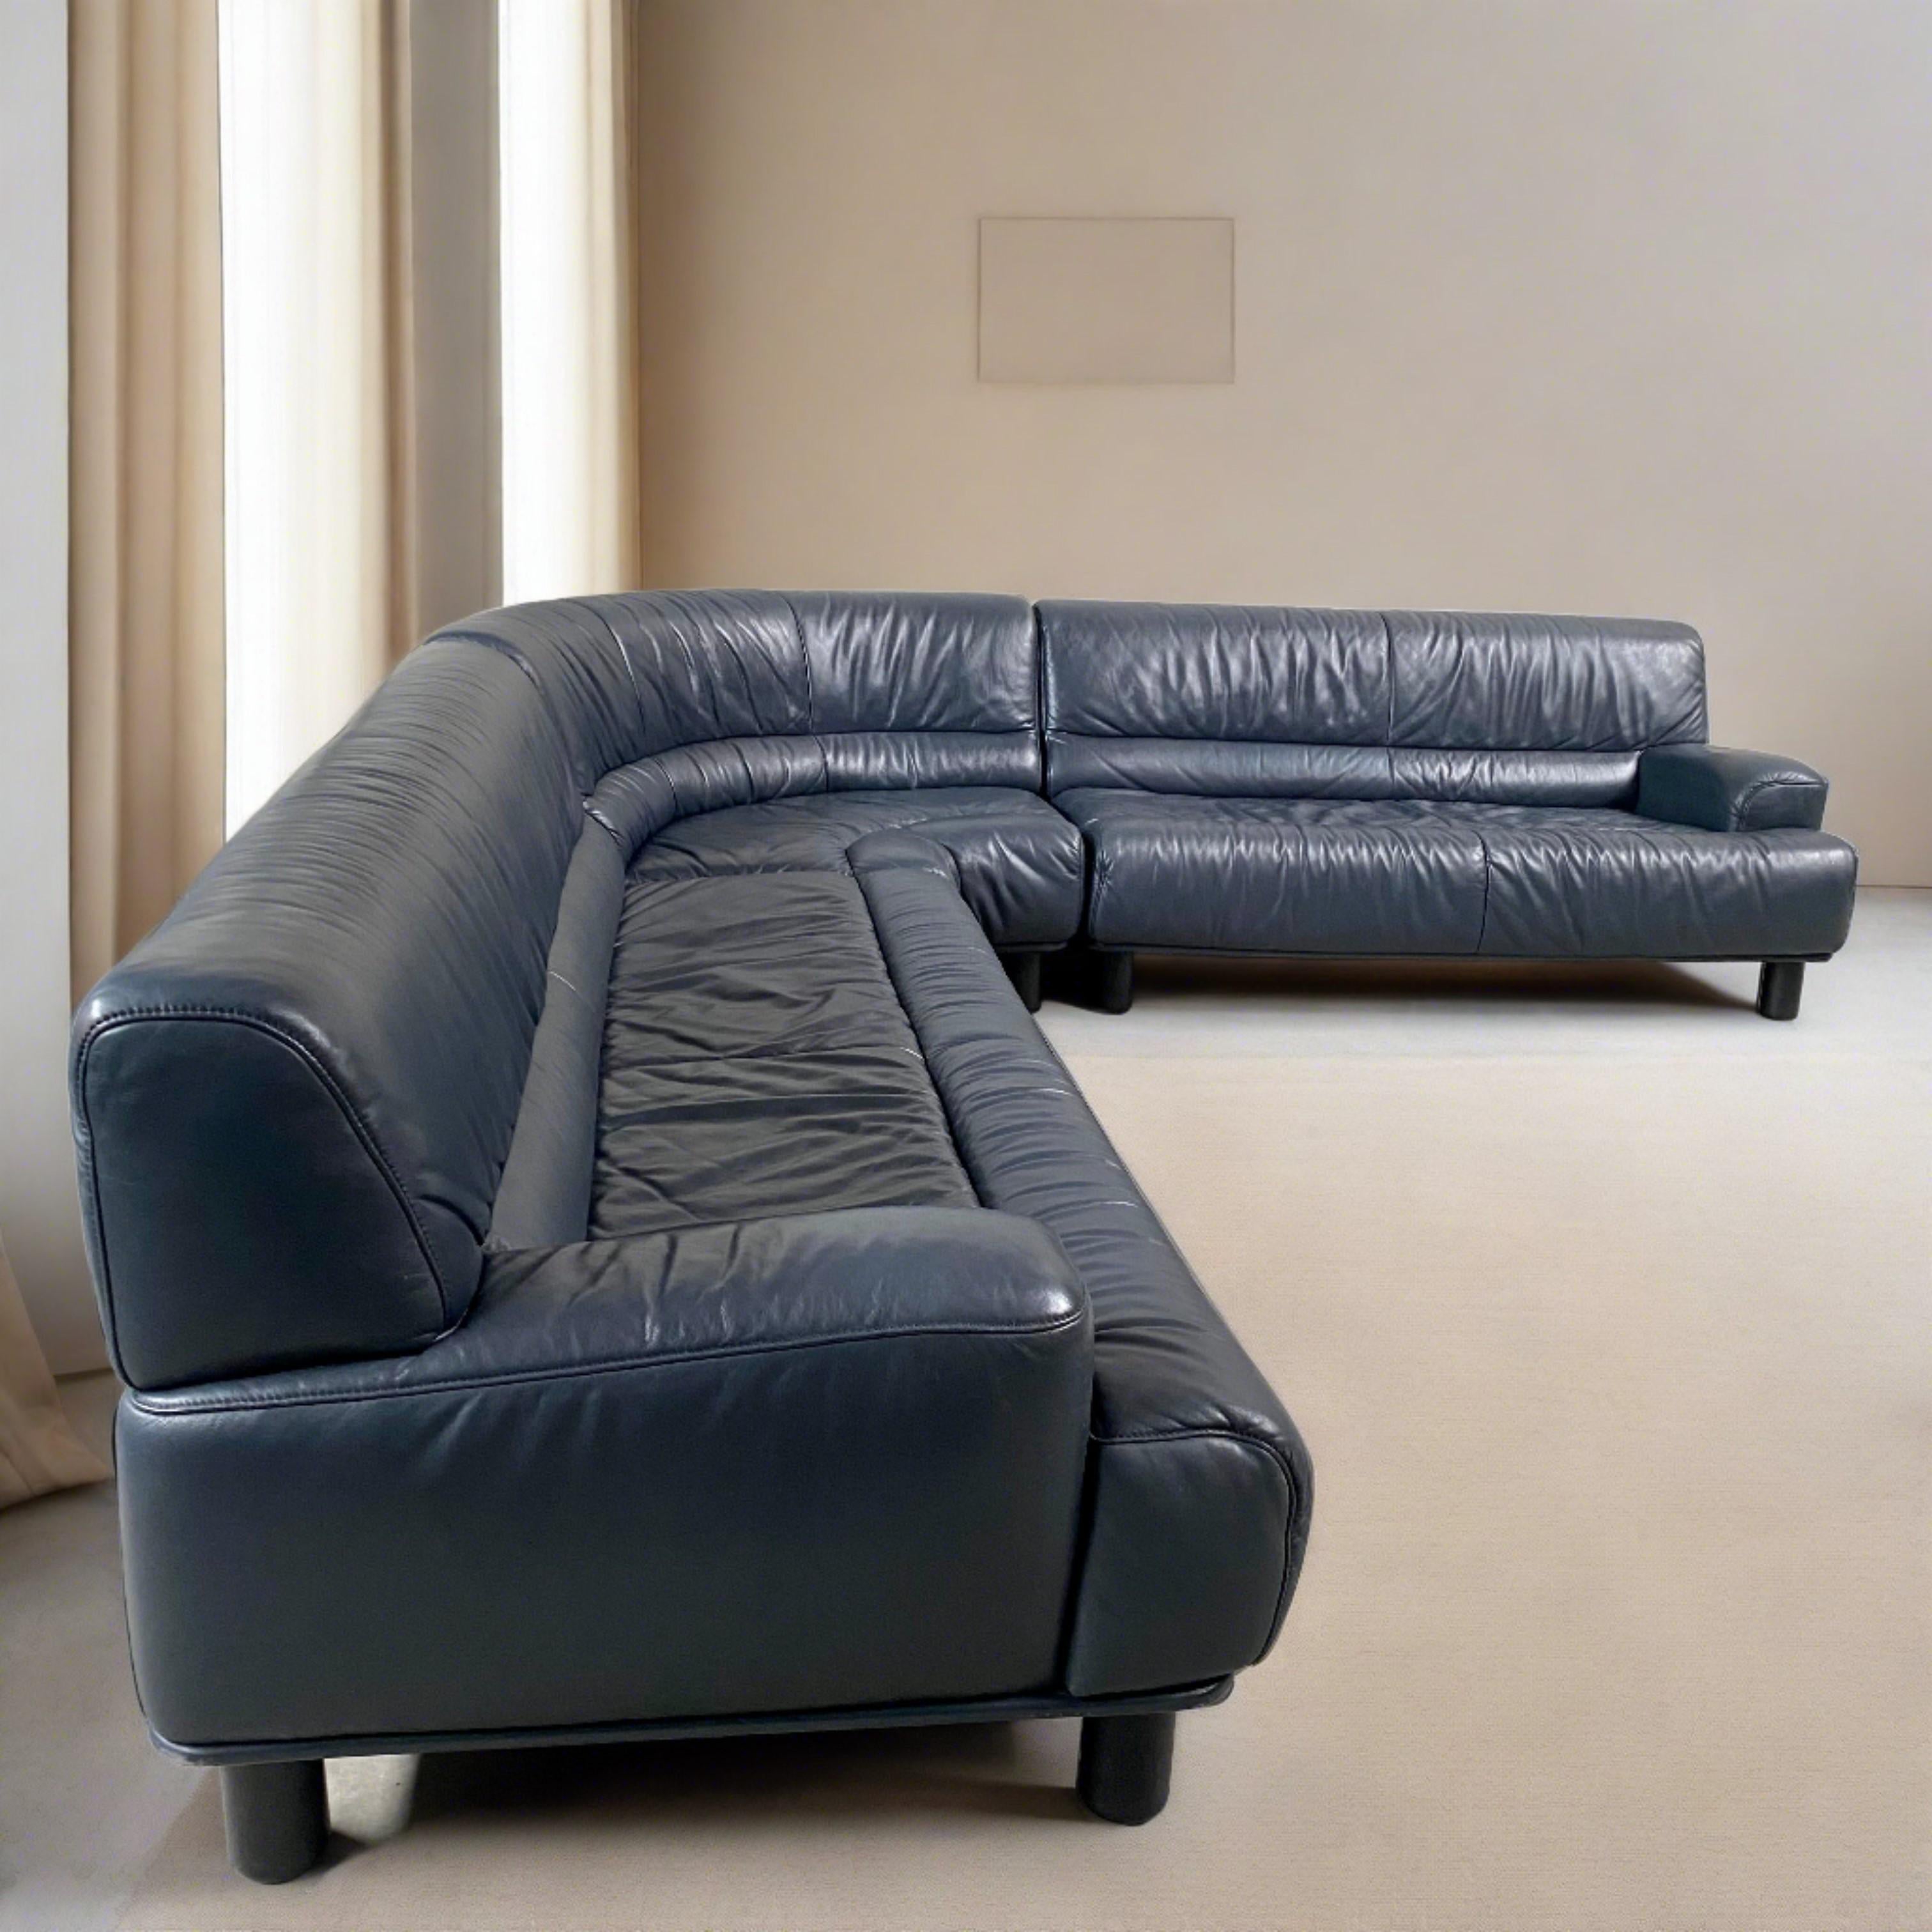 large black leather sectional